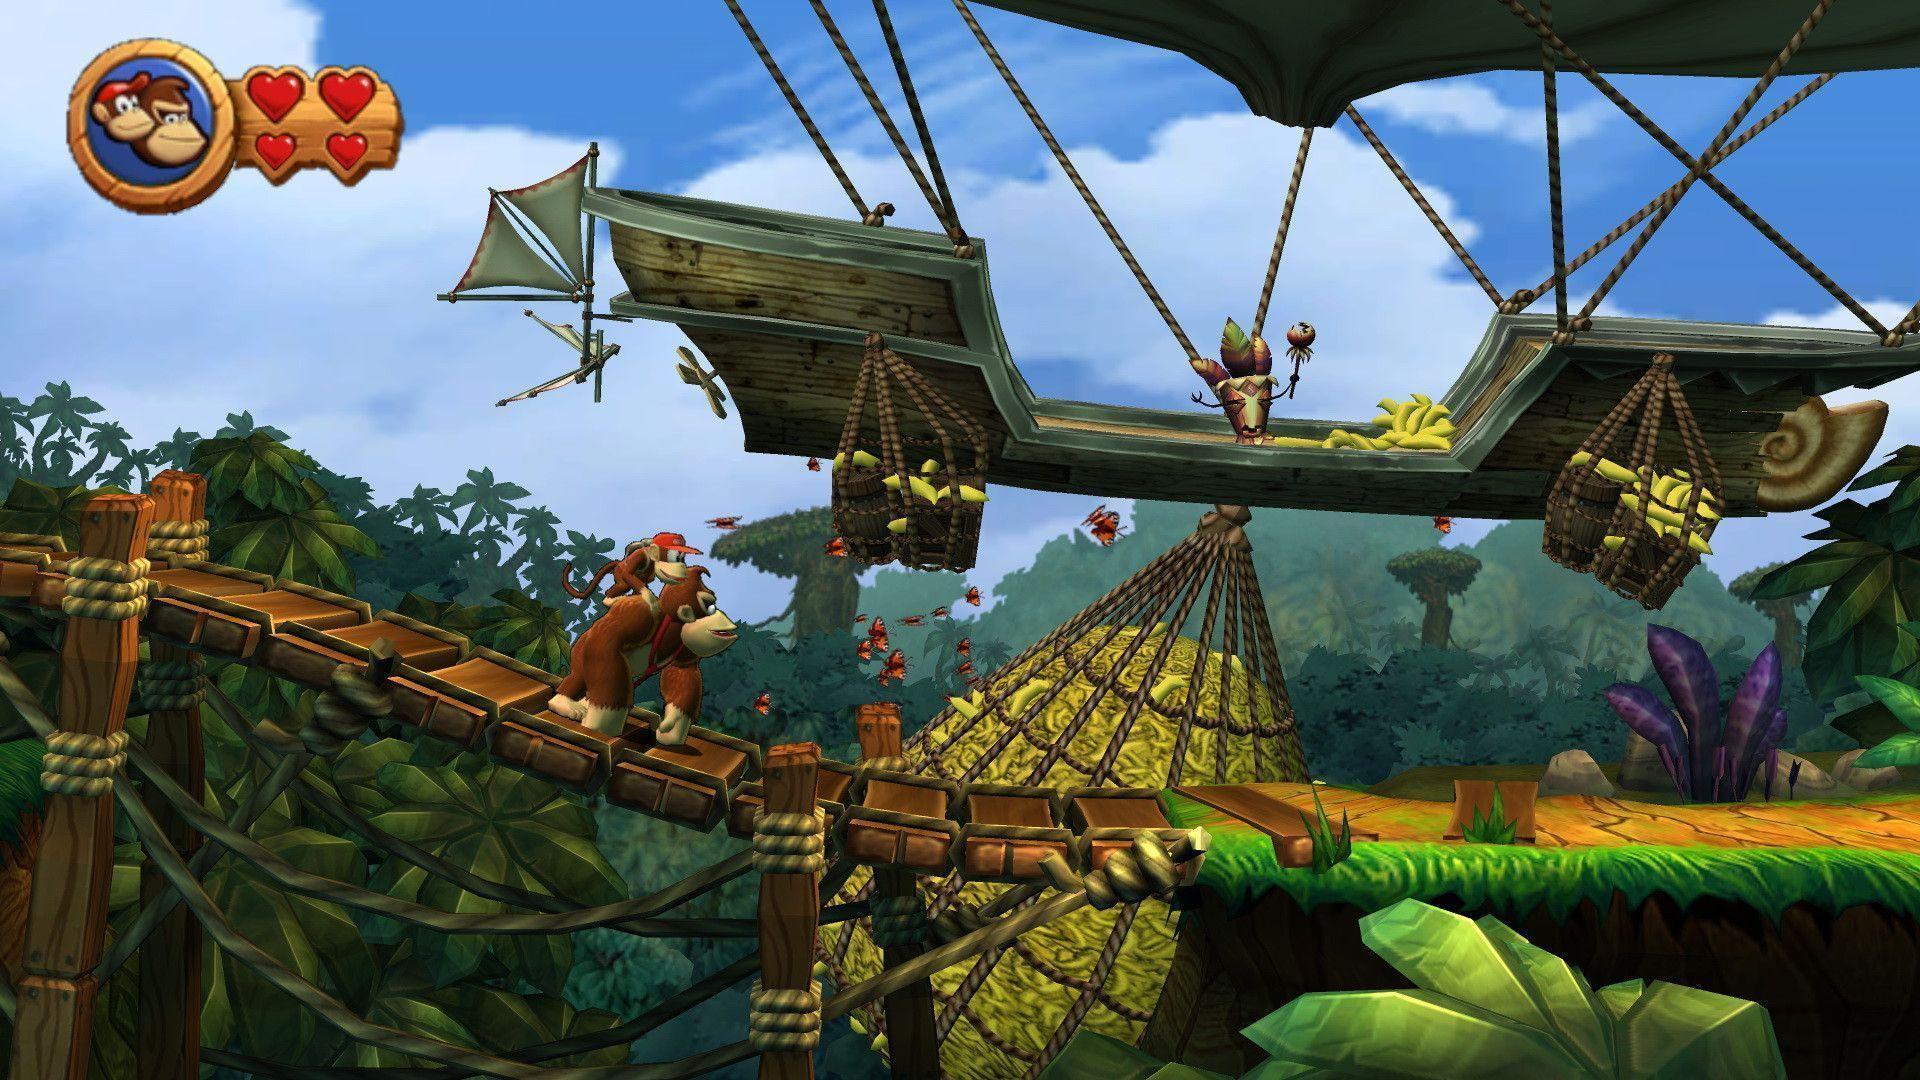 Donkey Kong Country Wallpaper. Donkey Kong Country Background